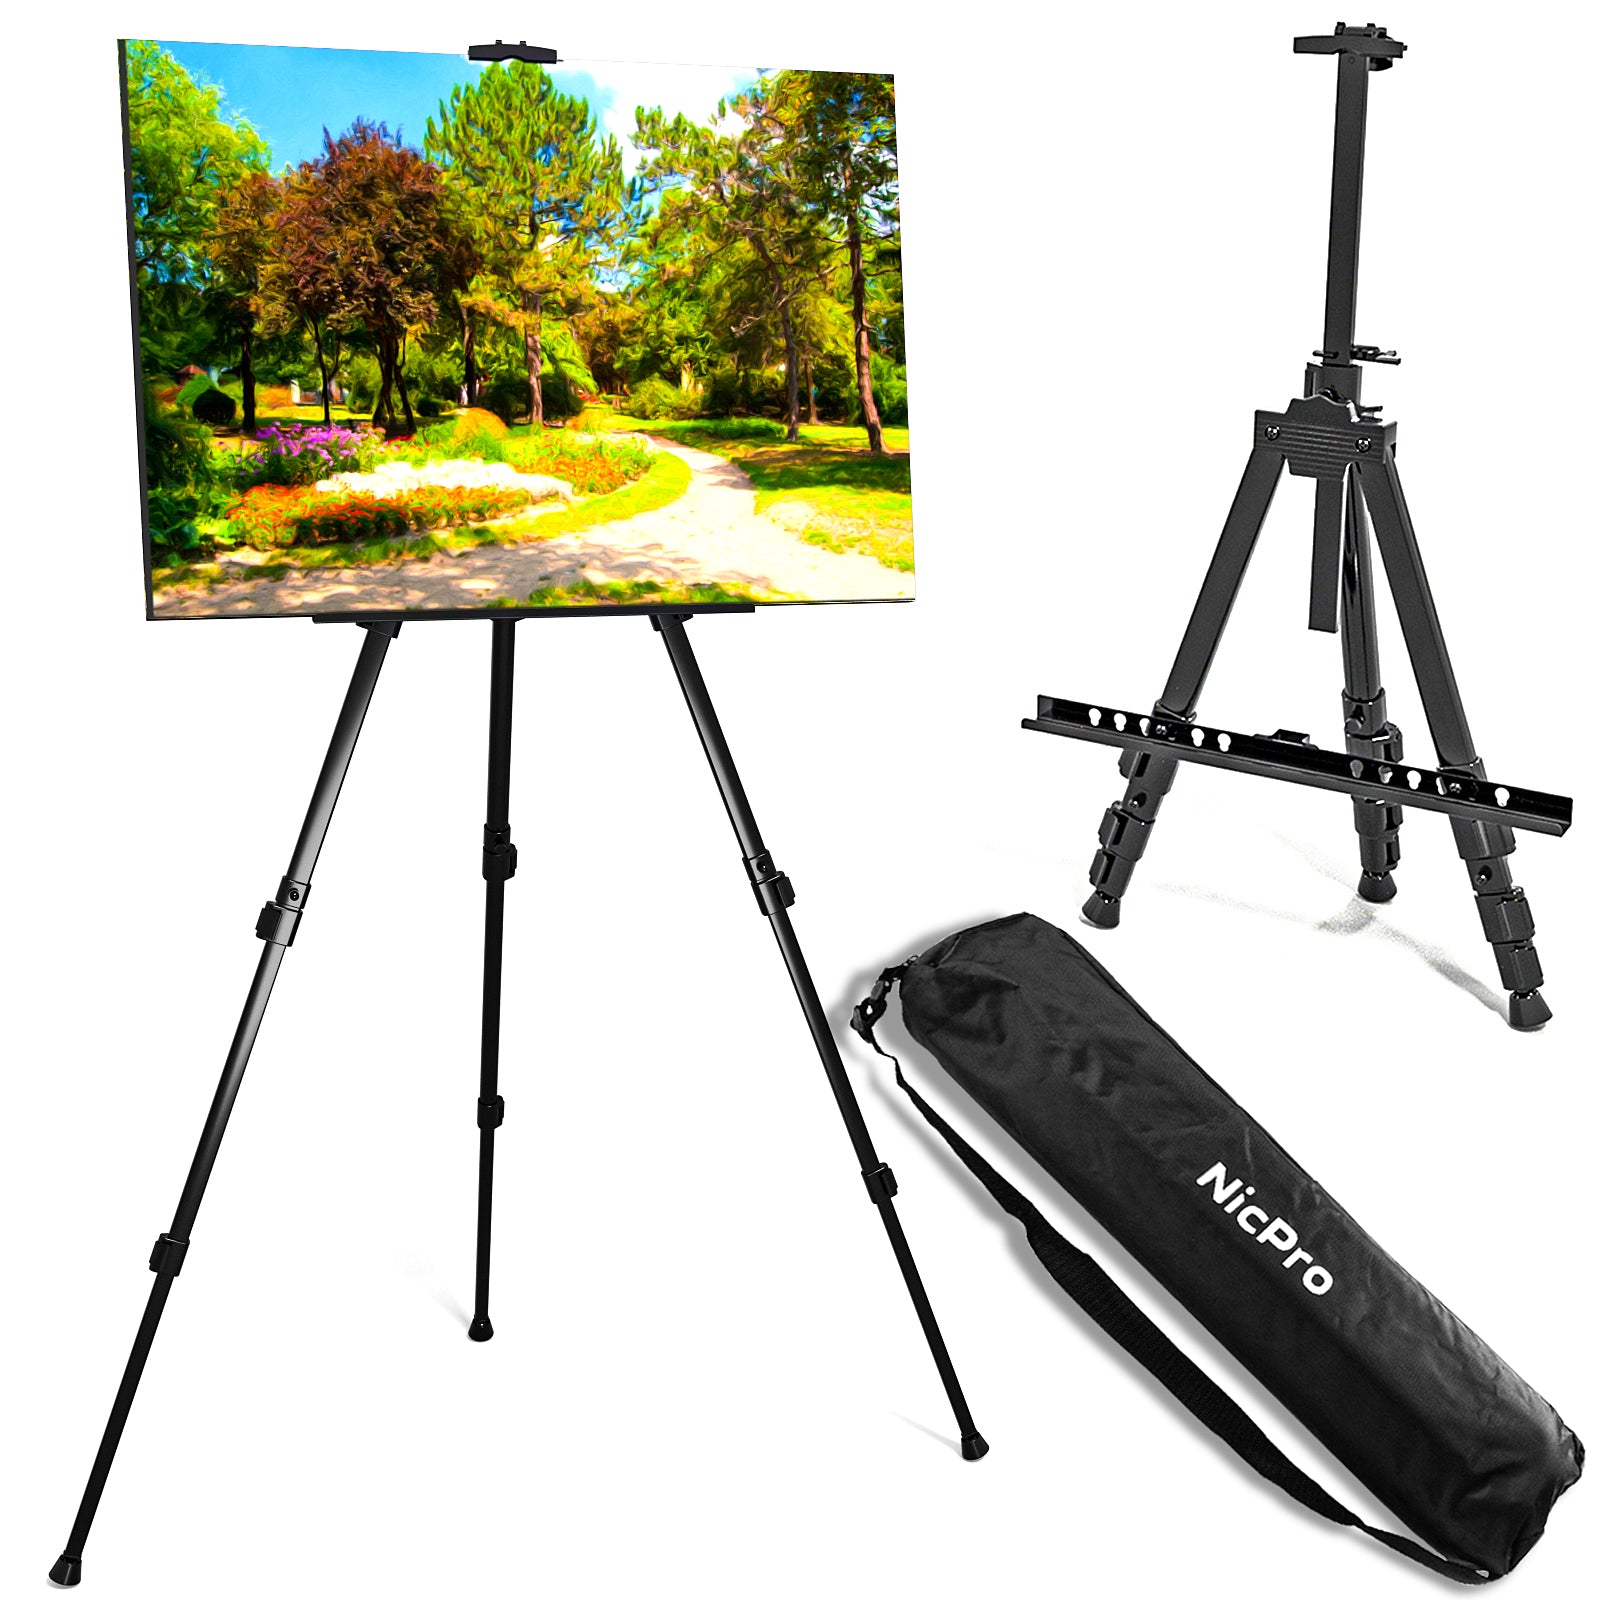 loeqian 2 Pack Painting Easel Stand 63 Foldable Easel Portable Artist Floor Easel, Metal Easel Stand for Display Wedding Sign, Art P